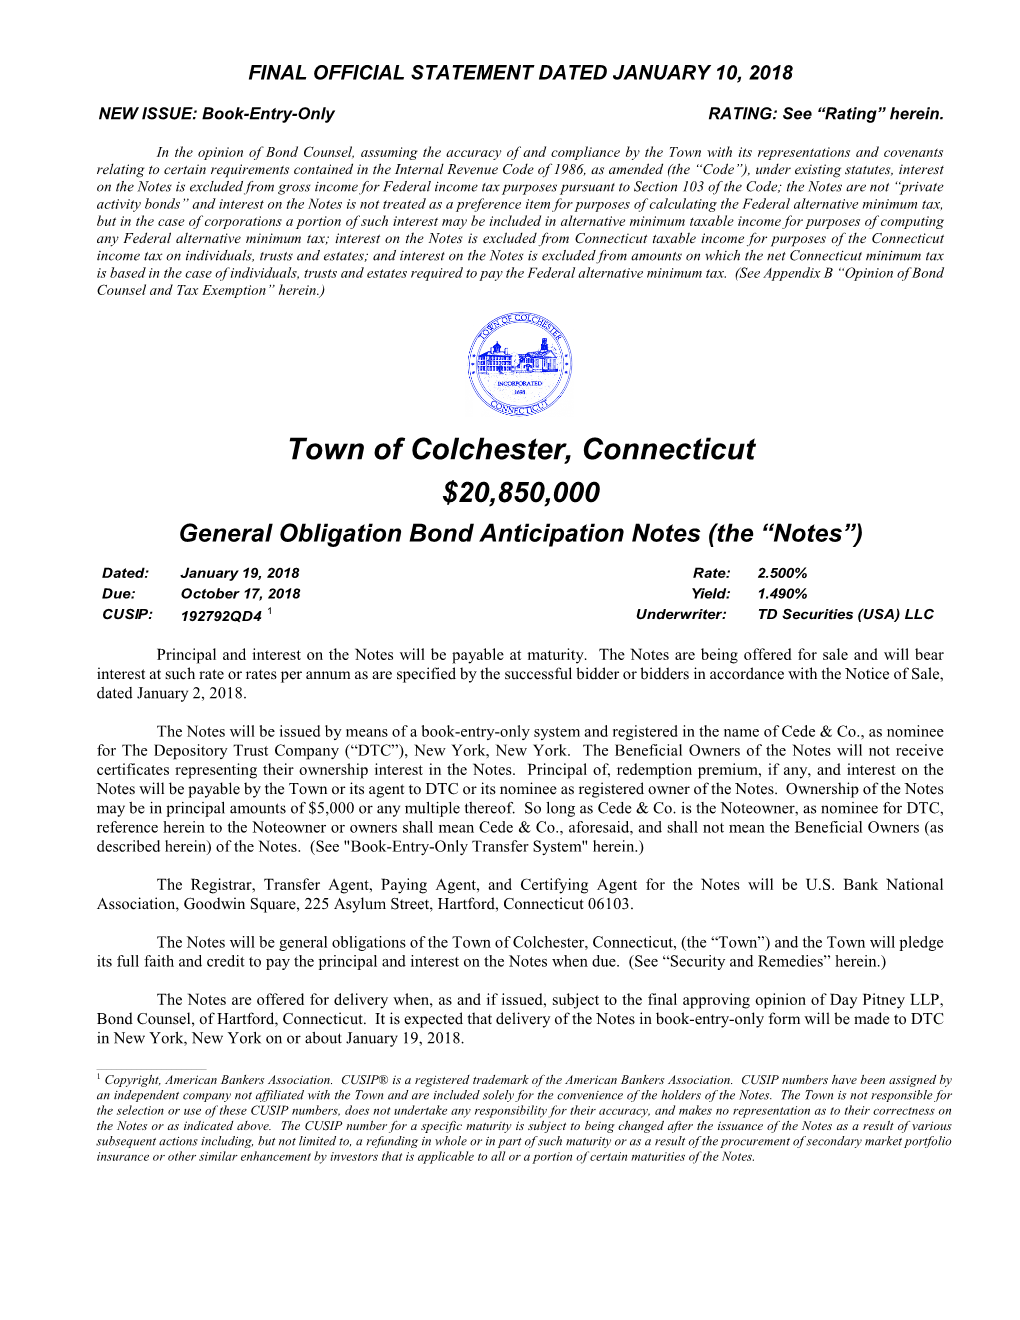 Town of Colchester, Connecticut $20,850,000 General Obligation Bond Anticipation Notes (The “Notes”)